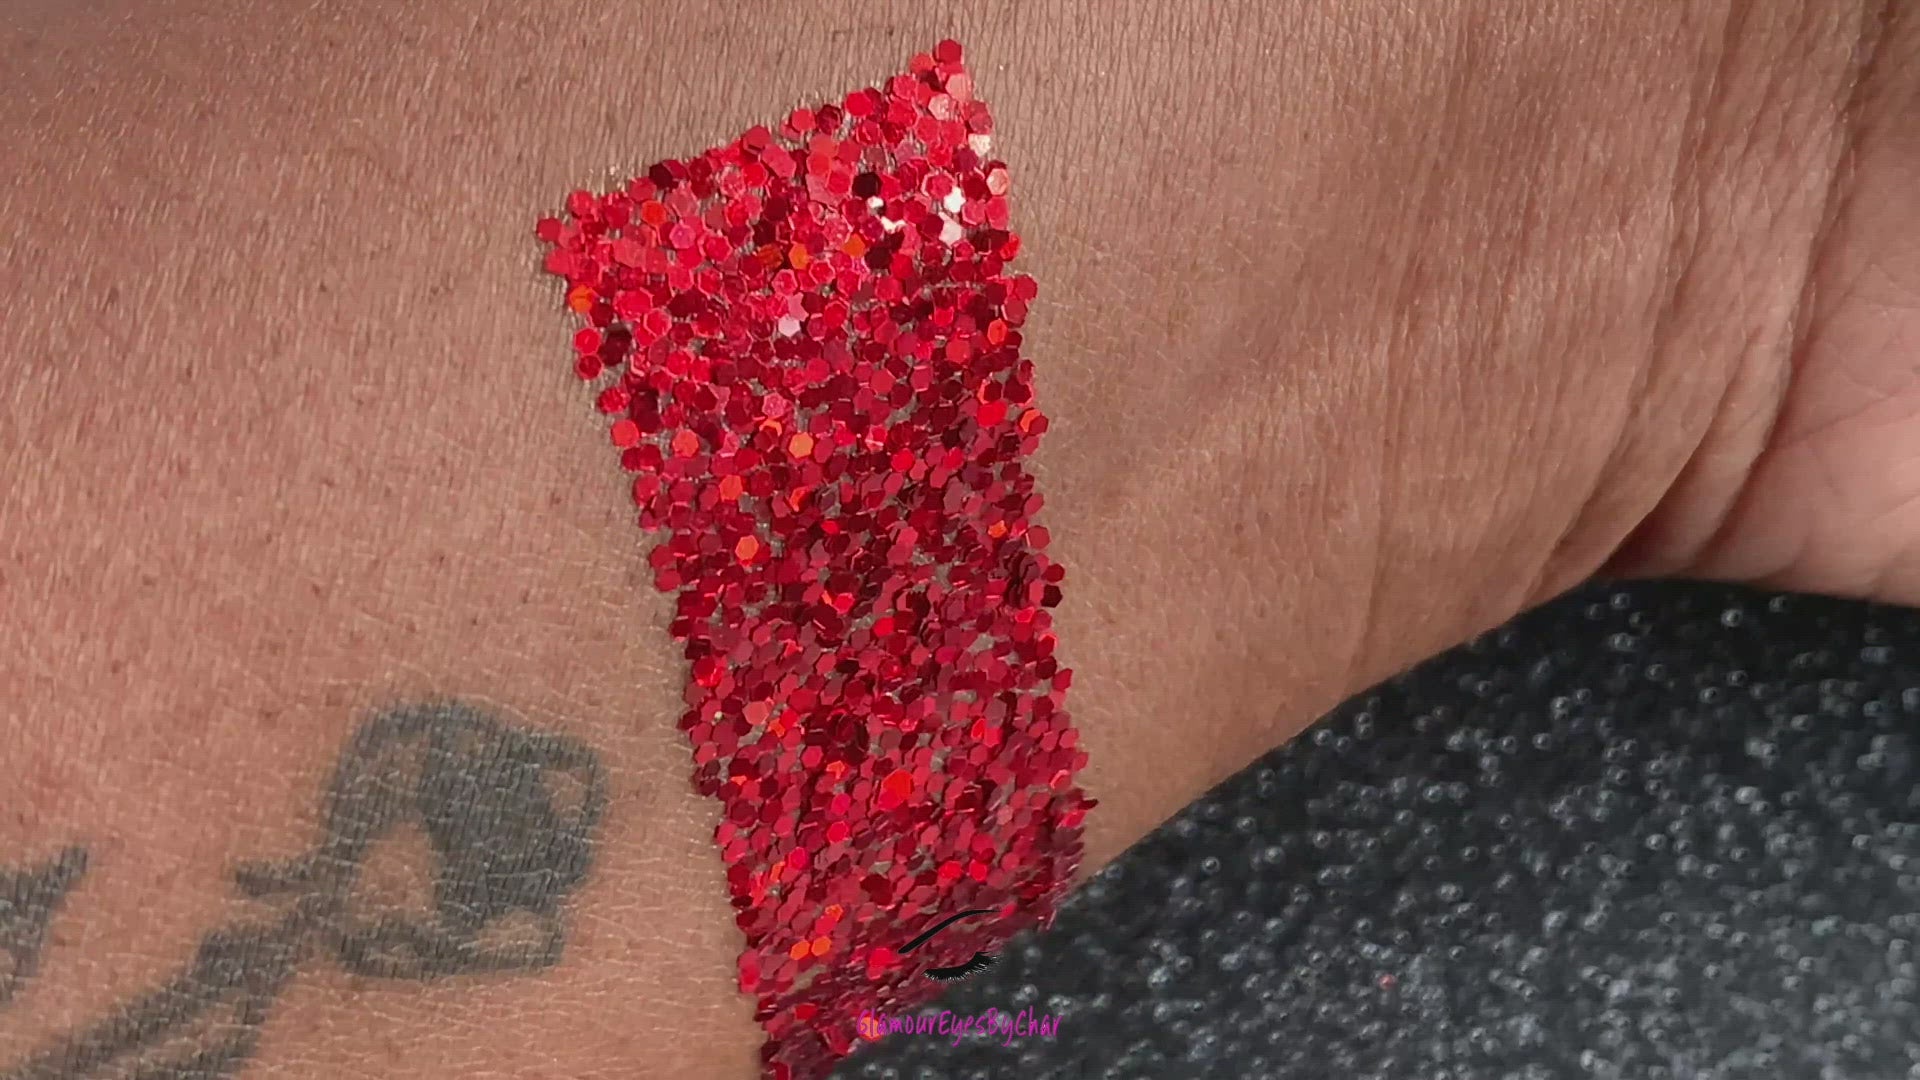 This glitter is called Red Pumps and is part of the simple glitter collection. It consists of ruby red simple glitter. Flake size are larger than fine and extra fine glitter. Red Pumps can be used for your face, body, hair and nails. Comes in 5g jars only.